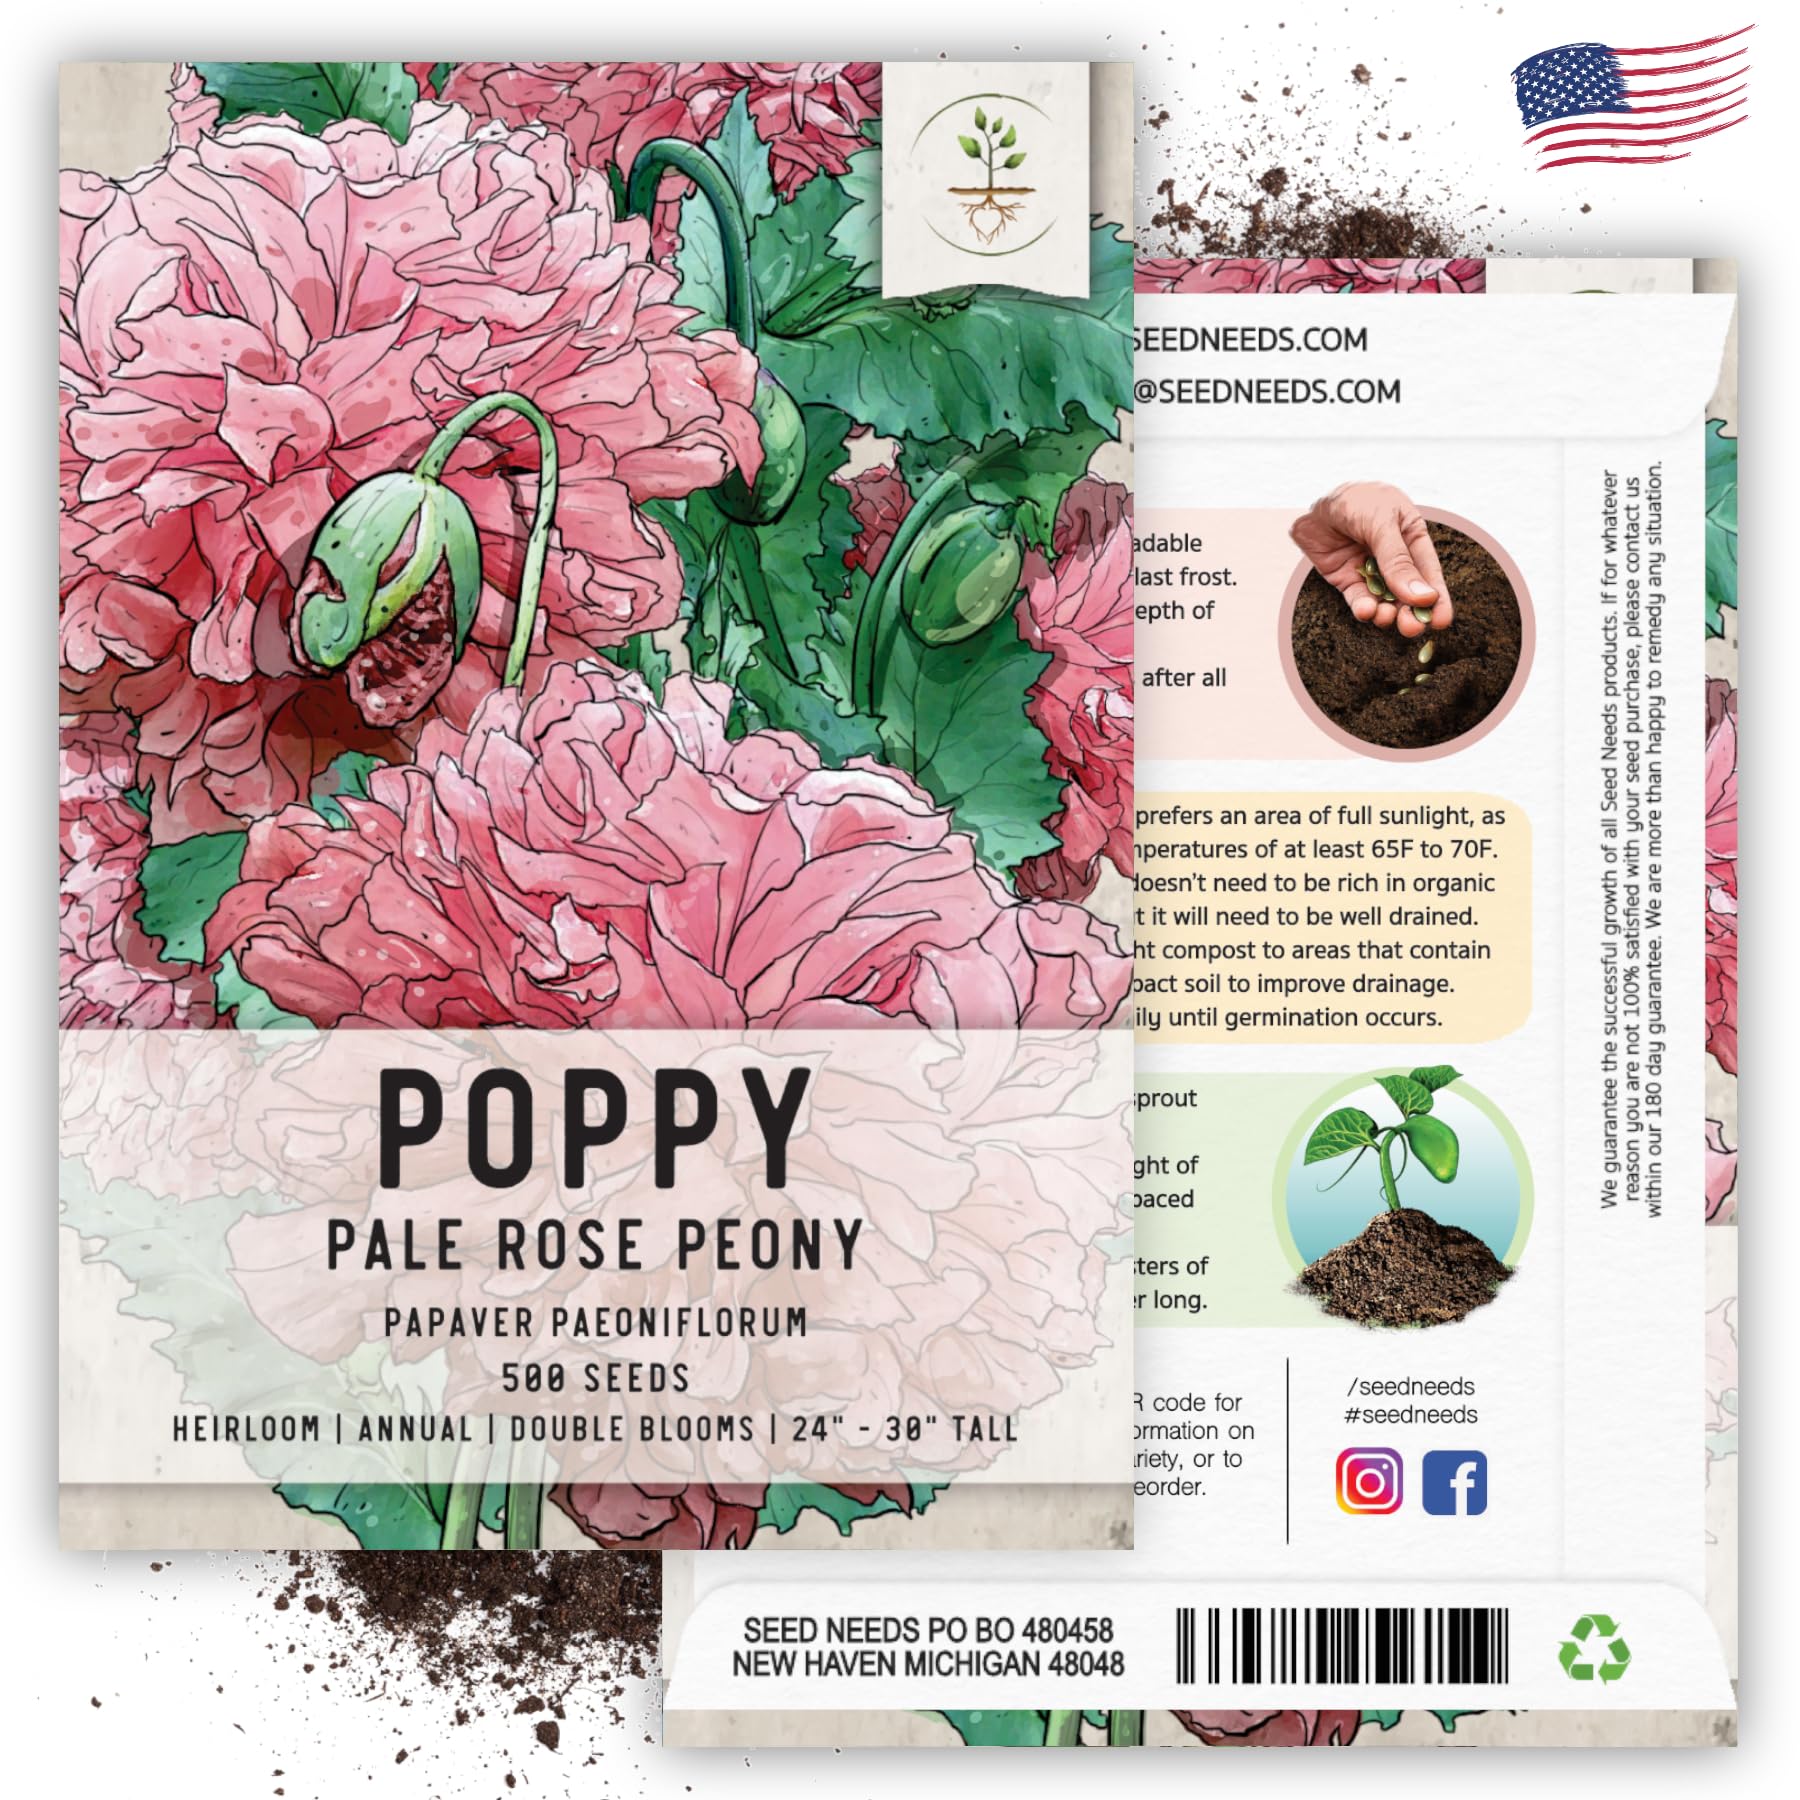 Seed Needs, Pale Rose Peony Poppy Seeds - 500 Heirloom Seeds for Planting Papaver paeoniflorum - Beautiful Pink Ruffled Blooms to Attract Butterflies to The Garden (1 Pack)